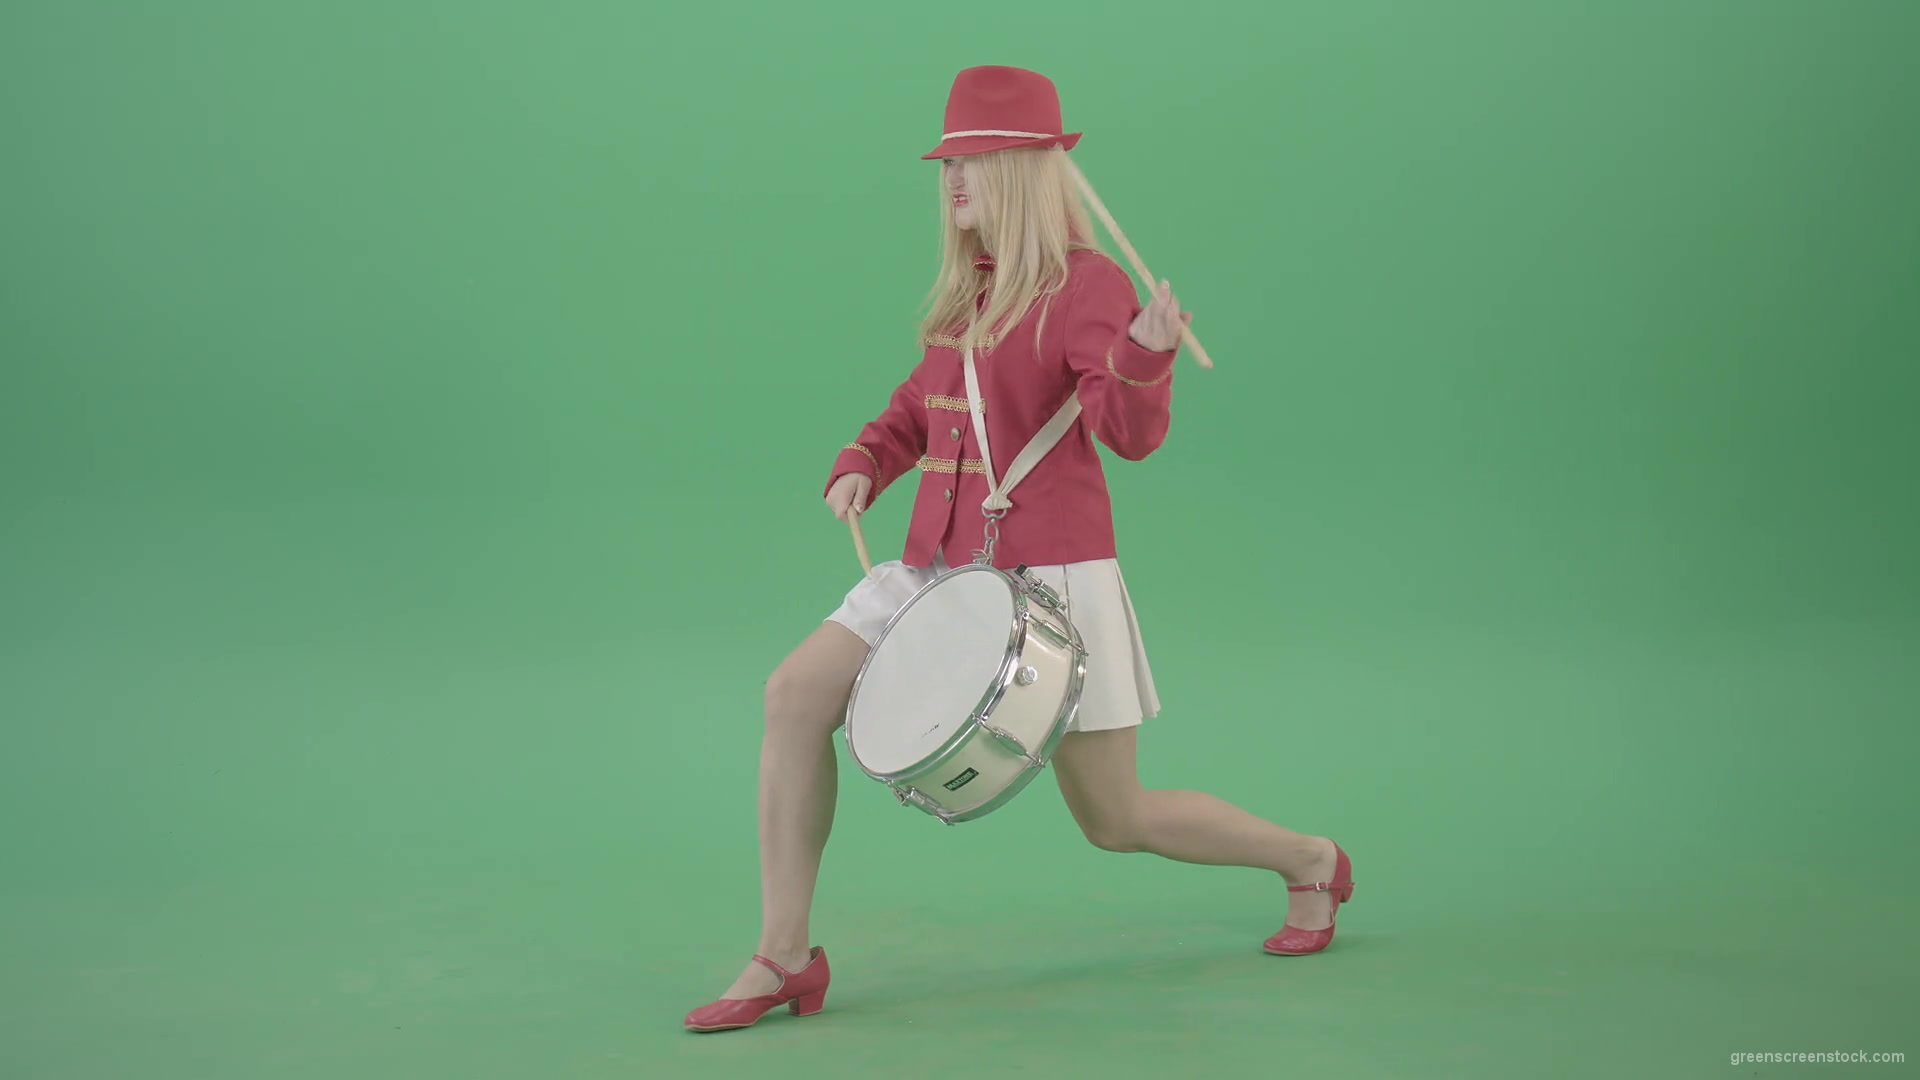 Blondie-is-ready-for-adventure-making-beats-on-snare-drum-isolated-on-Green-Screen-4K-Video-Footage-1920_002 Green Screen Stock